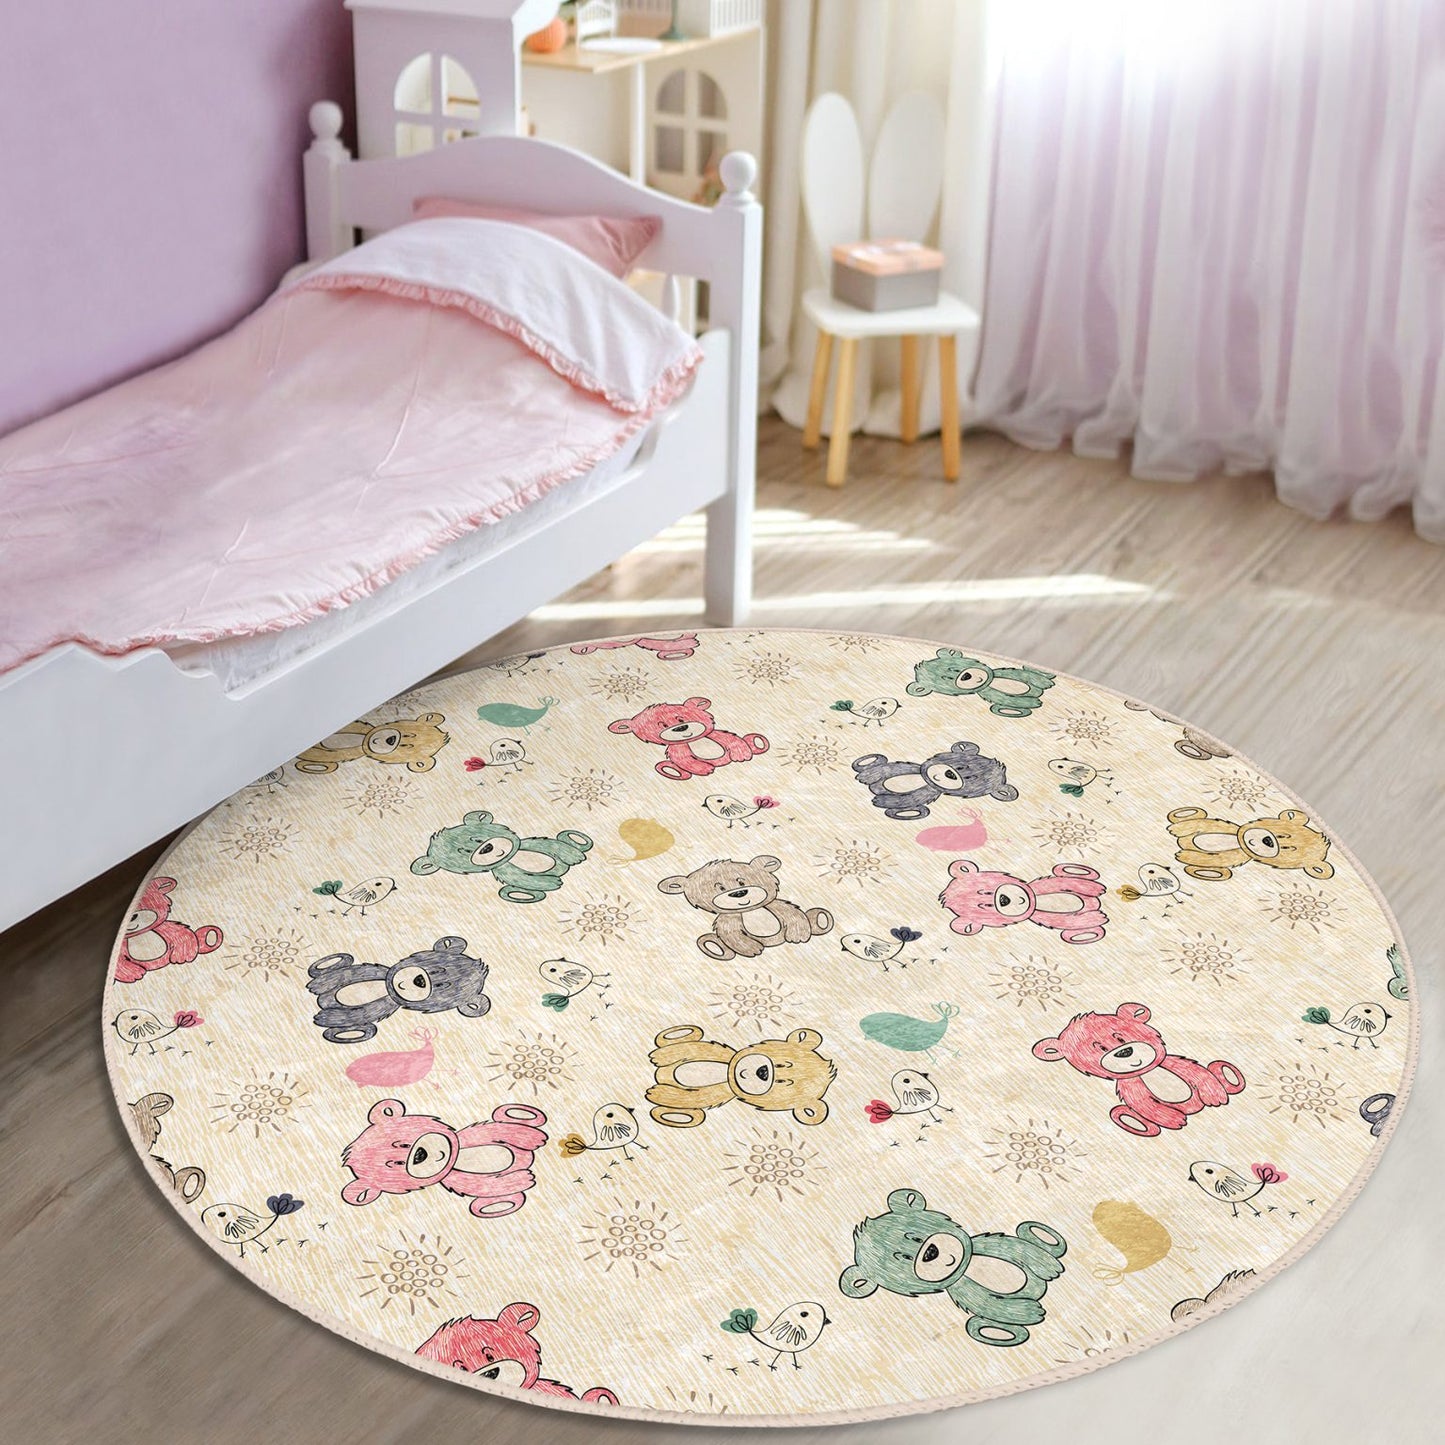 Kid-Friendly Baby Room Rug with Colorful Teddy Bears